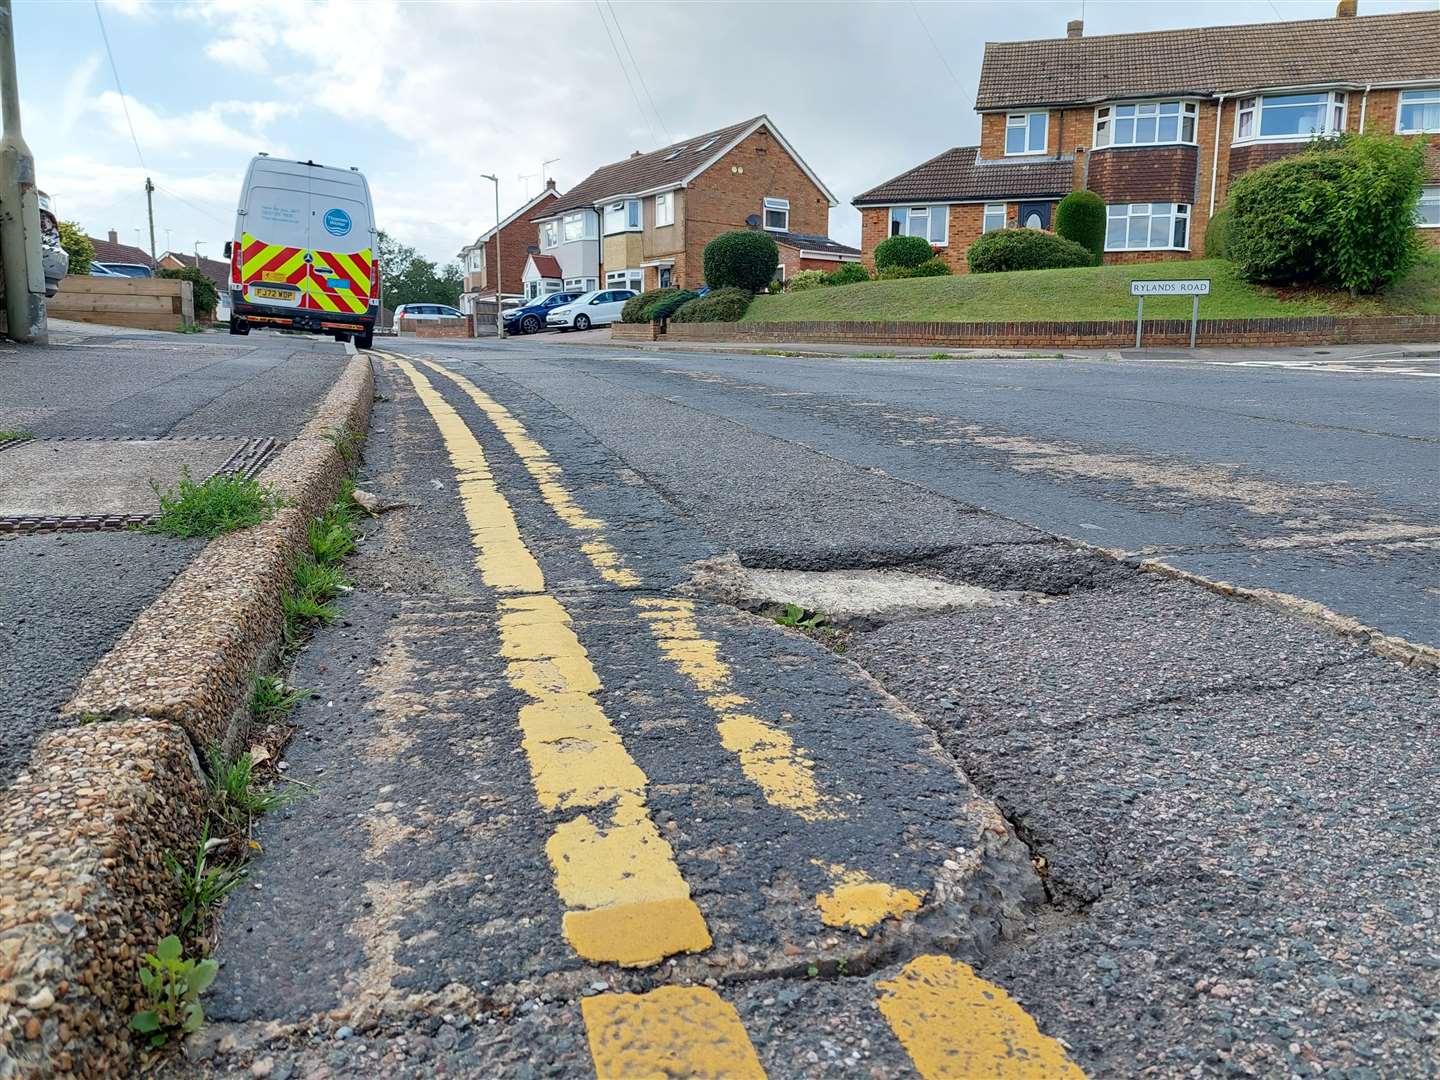 Bybrook Road in Ashford will close for resurfacing works